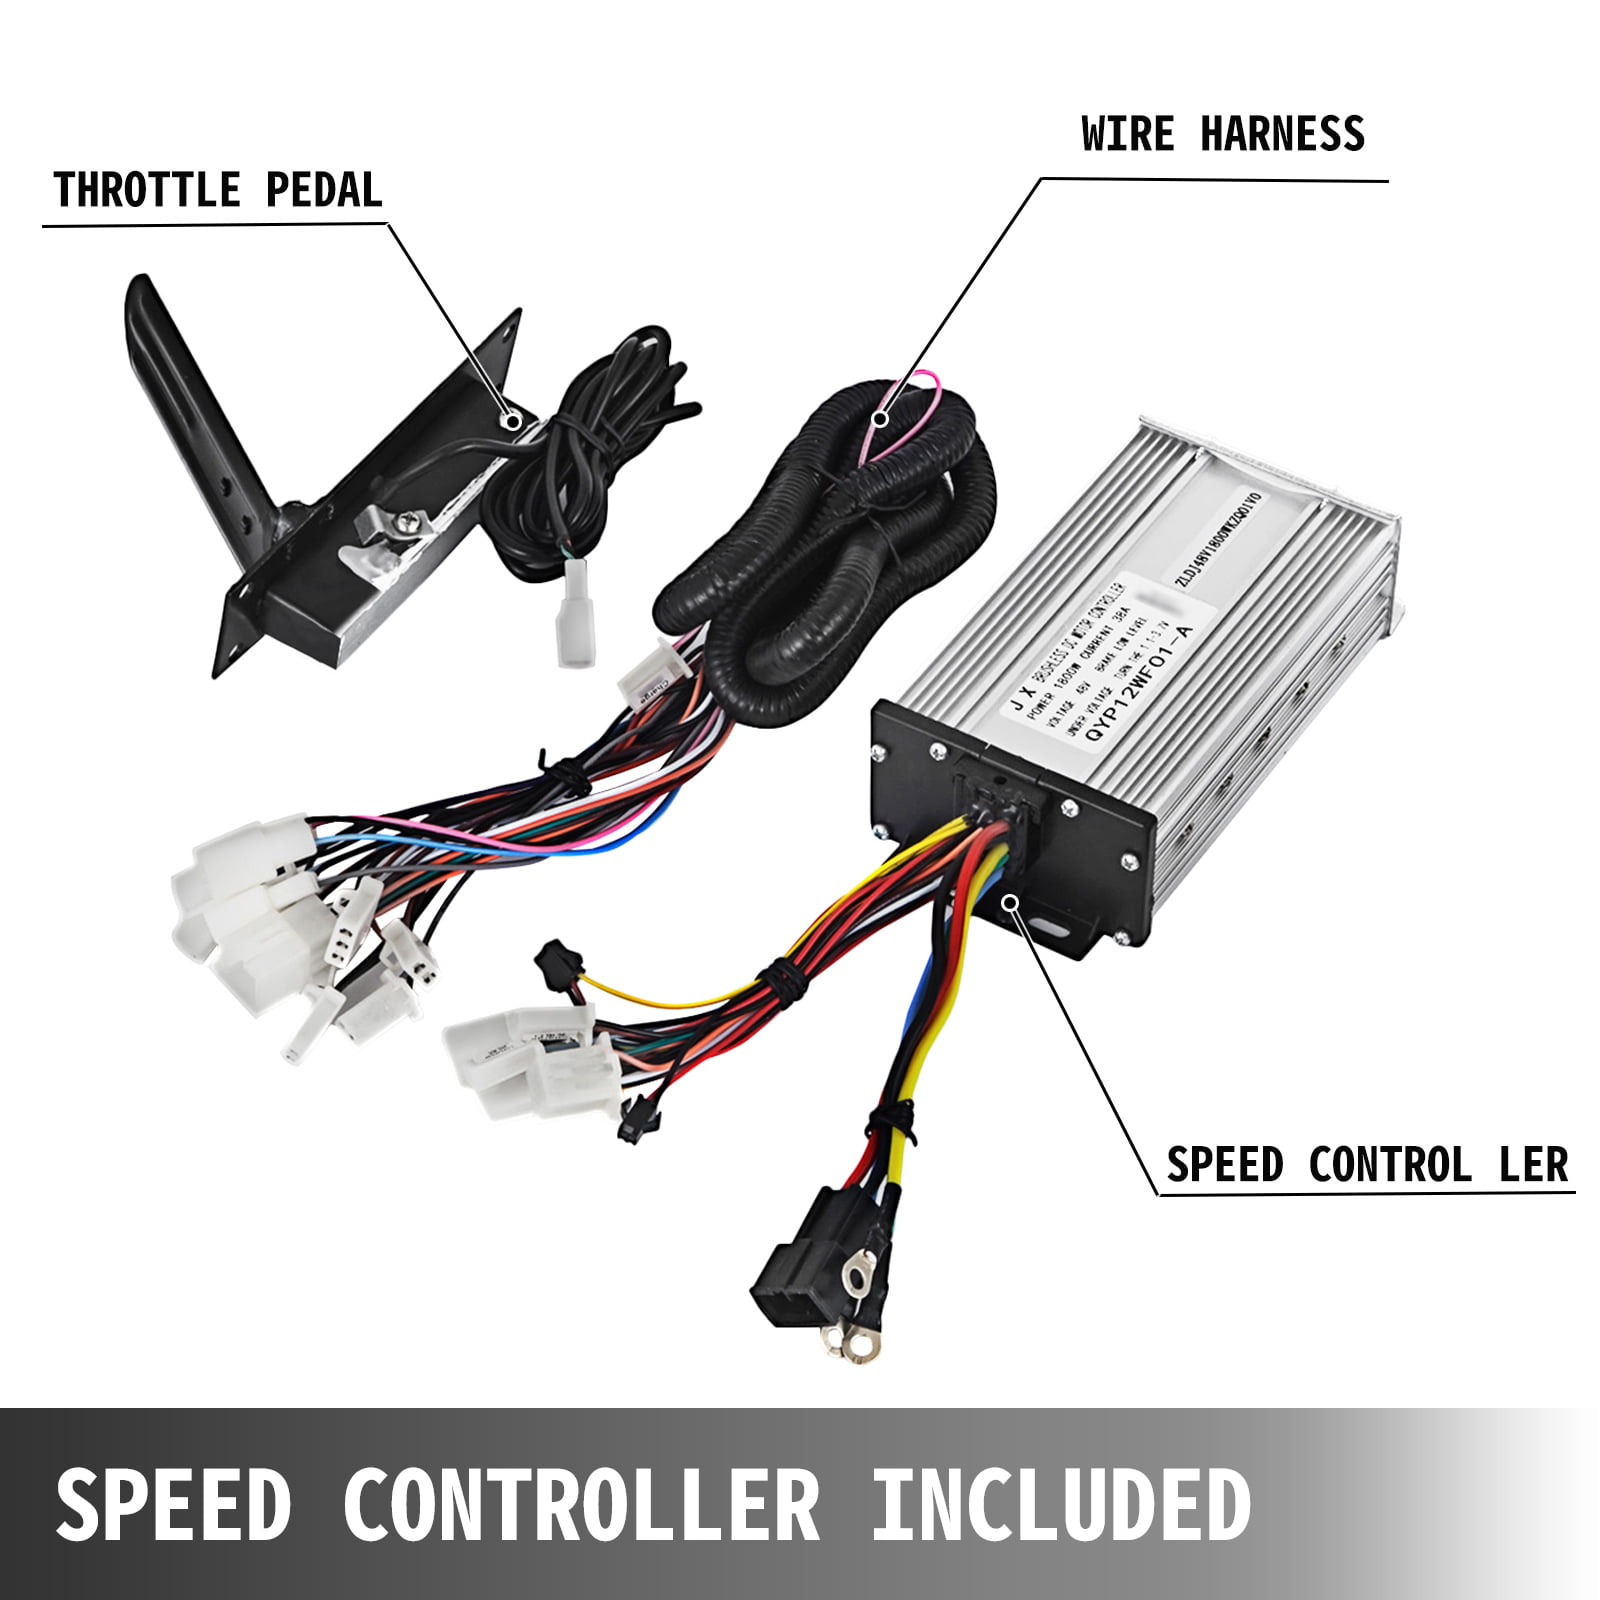 1800W 48V Brushless Motor Controller Pedal Wire Harness Throttle Battery DIY 